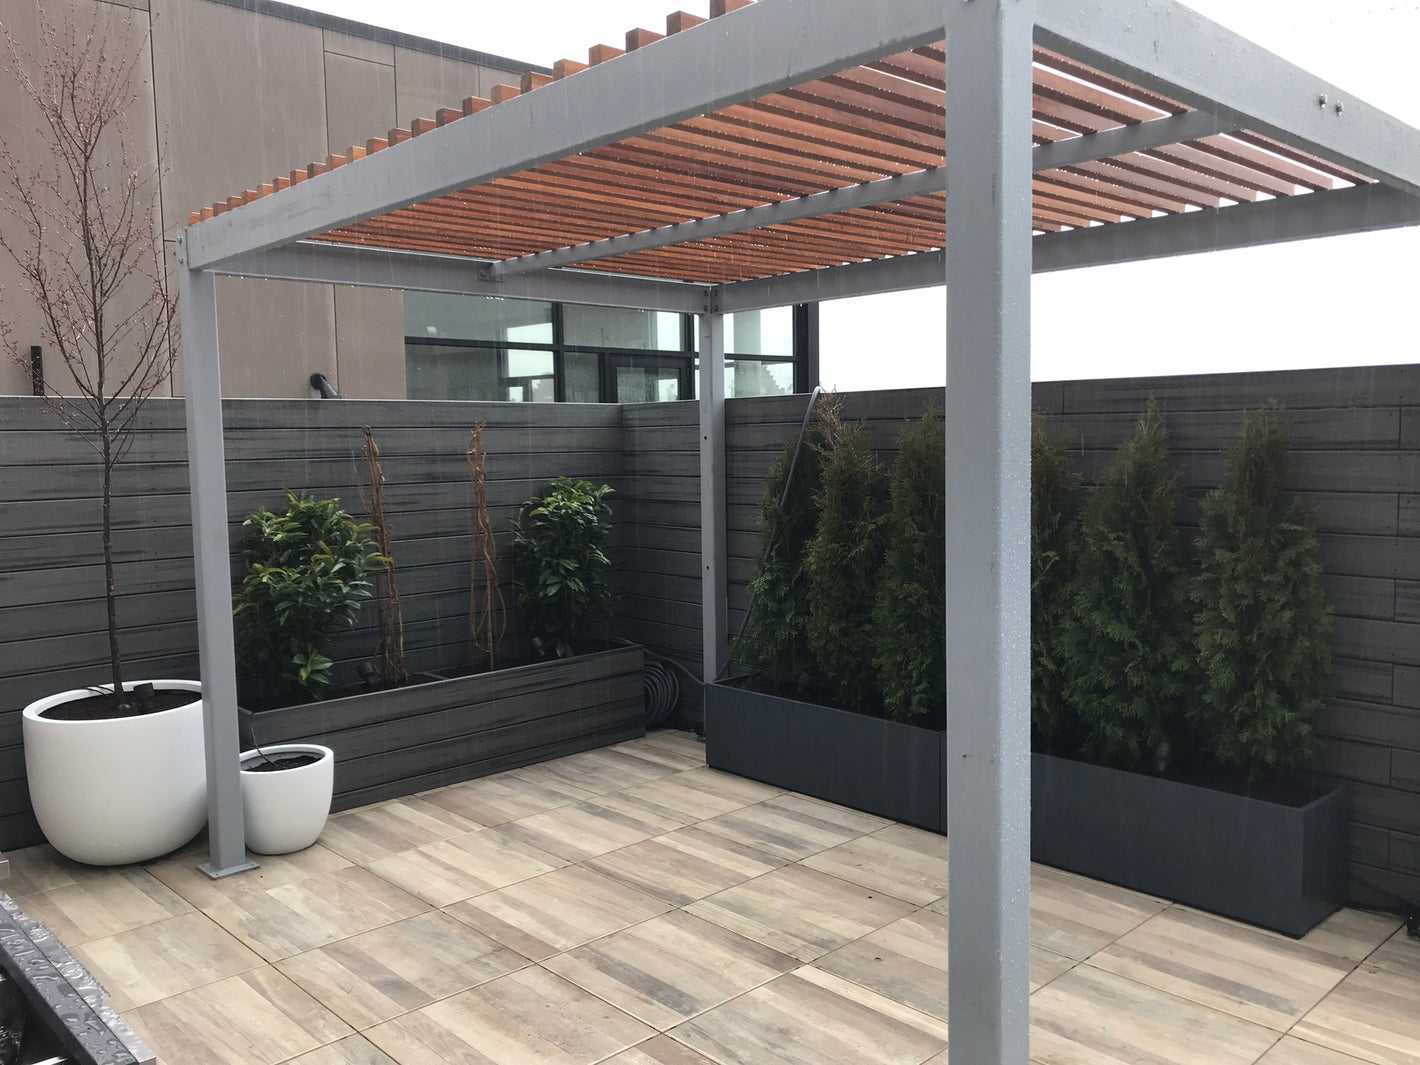 Outdoor pergola framed with gray aluminum and wood perlins on top created by TCSC